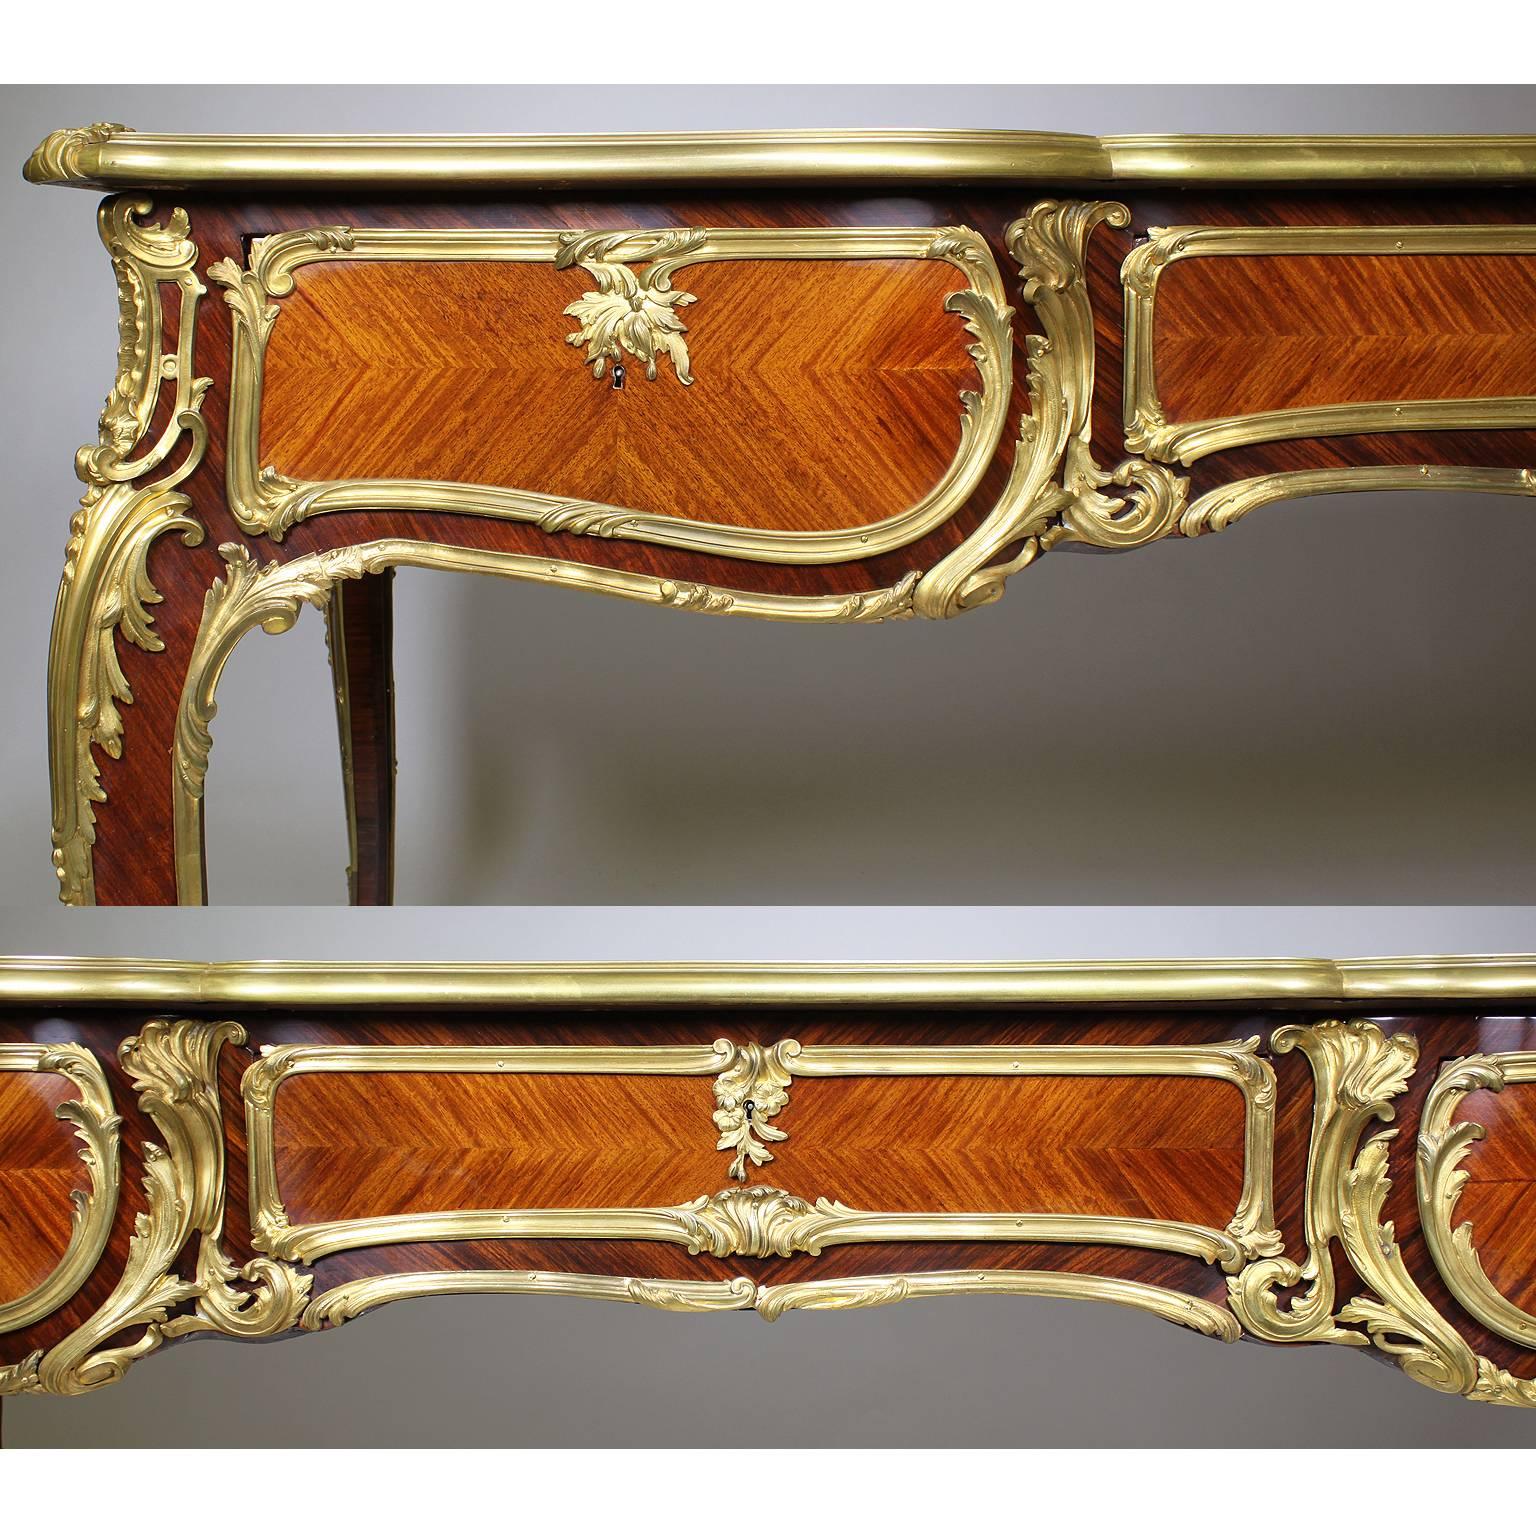 Embossed French 19th Century Louis XV Style Kingwood Gilt-Bronze Mounted Bureau Plat Desk For Sale